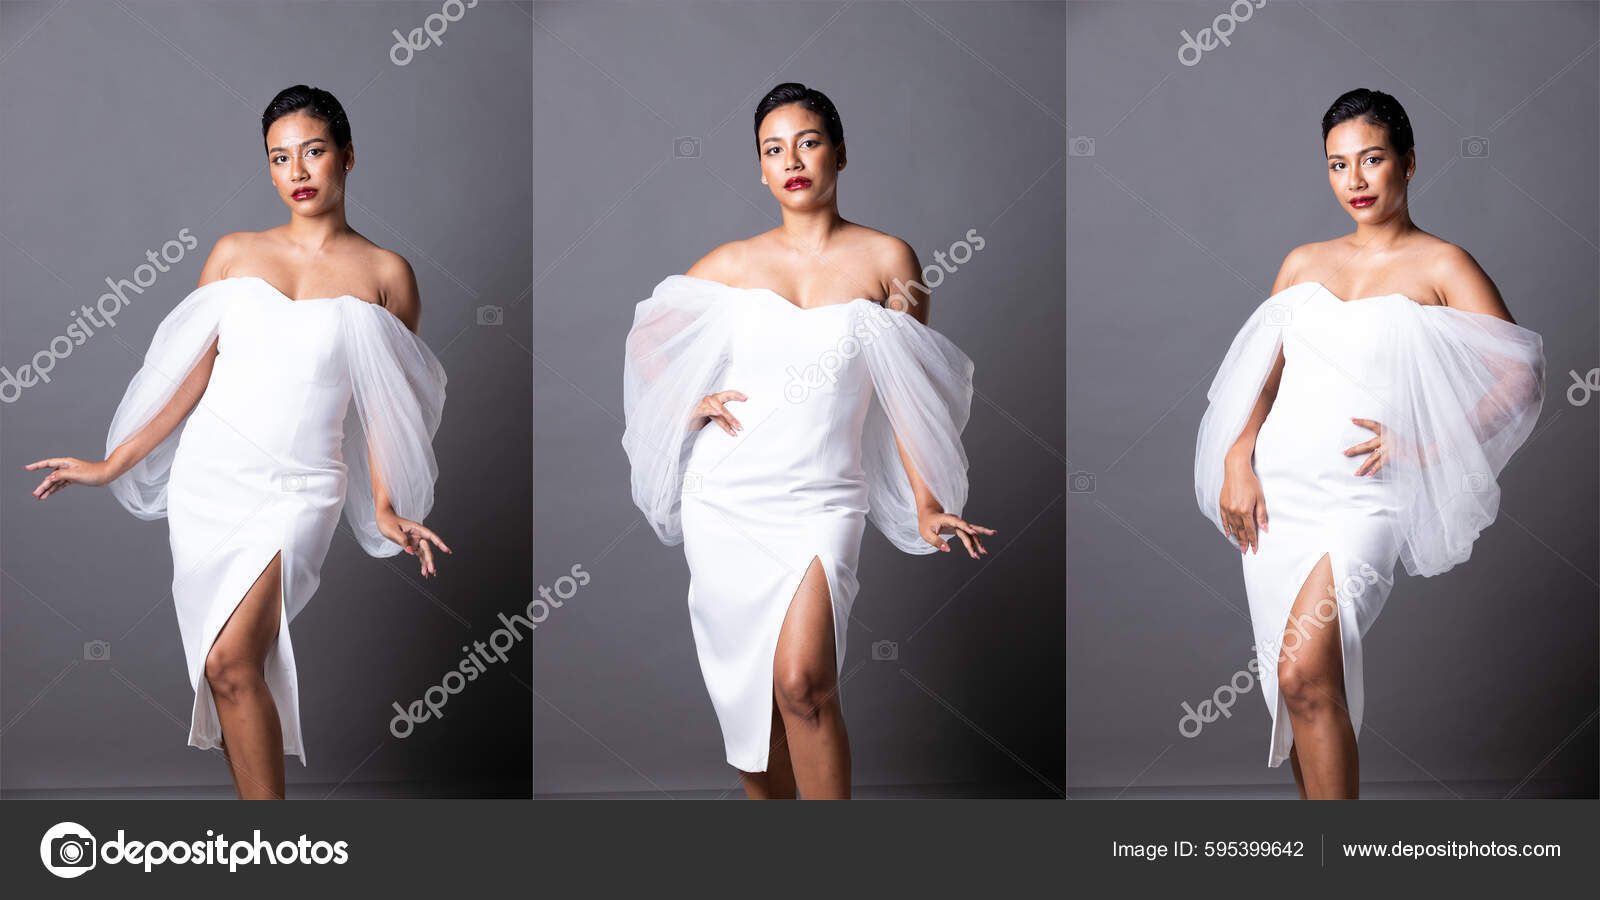 depositphotos 595399642 stock photo tanned skin 40s 30s indian